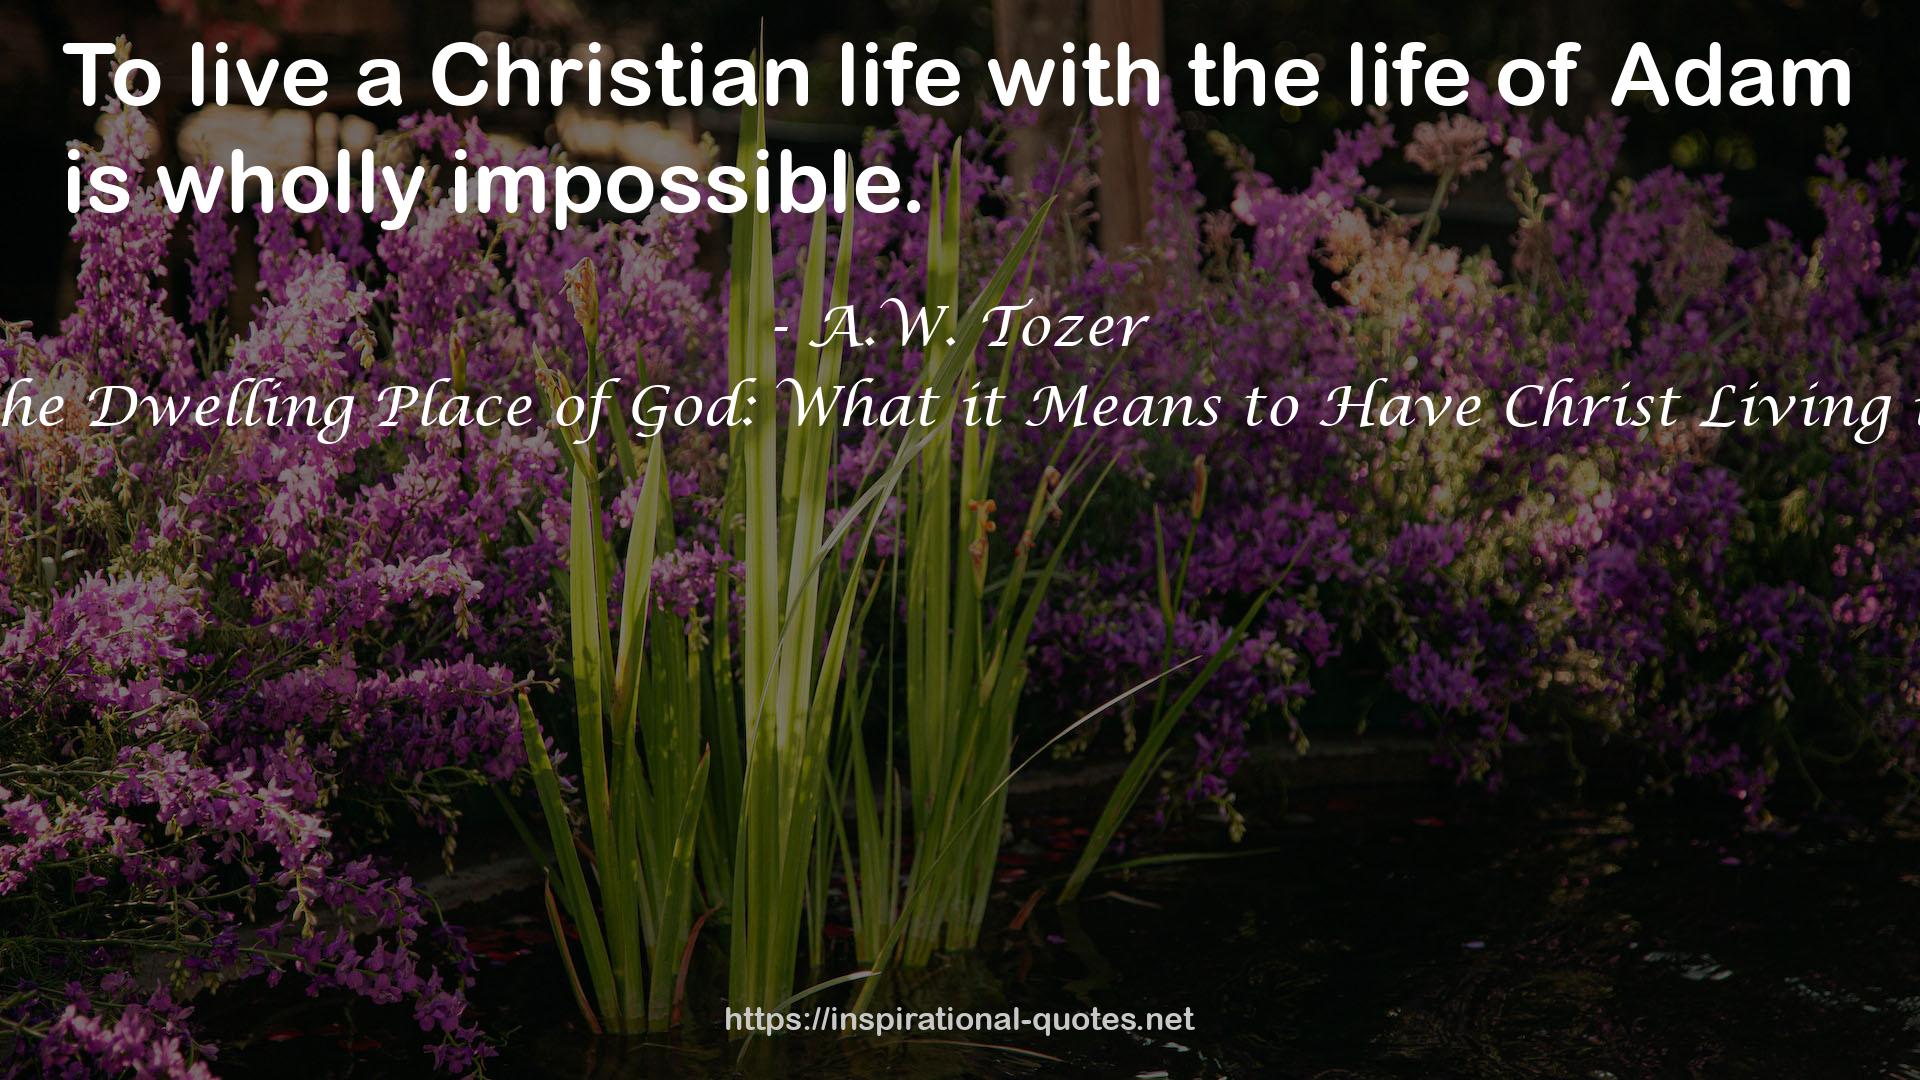 Man the Dwelling Place of God: What it Means to Have Christ Living in You QUOTES